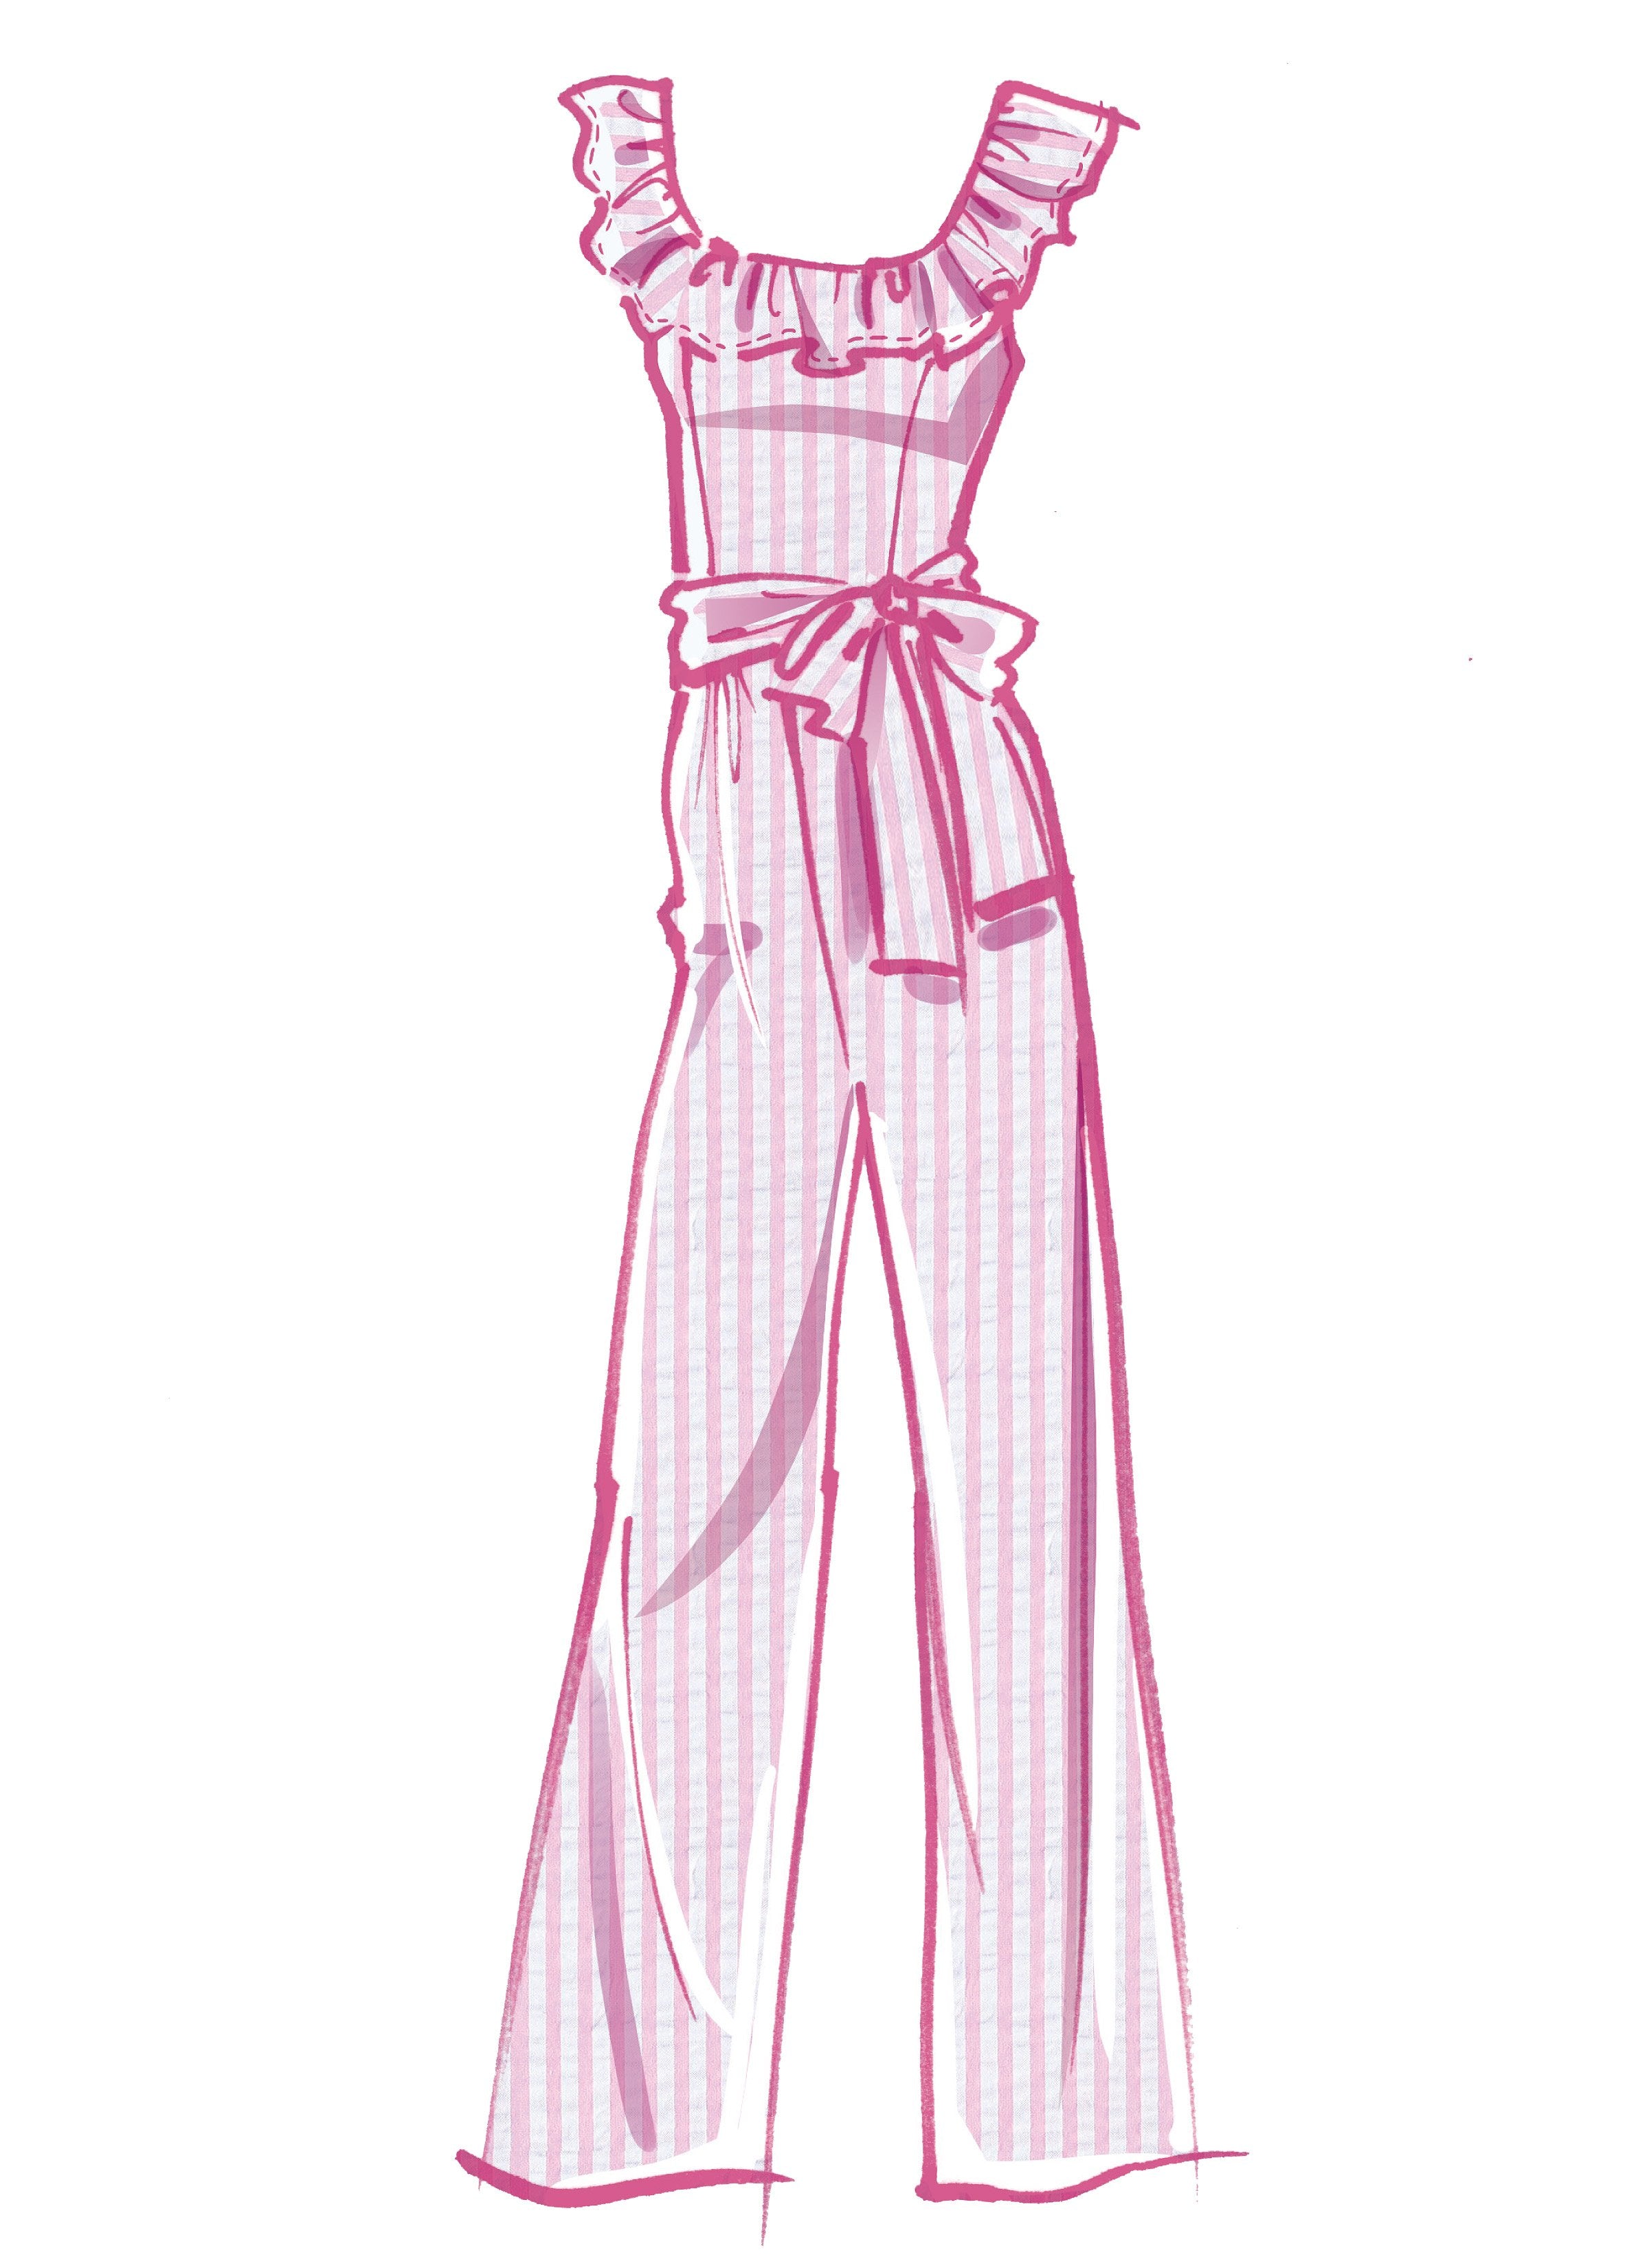 McCall's 8203 Romper, Jumpsuits and Sash sewing pattern from Jaycotts Sewing Supplies